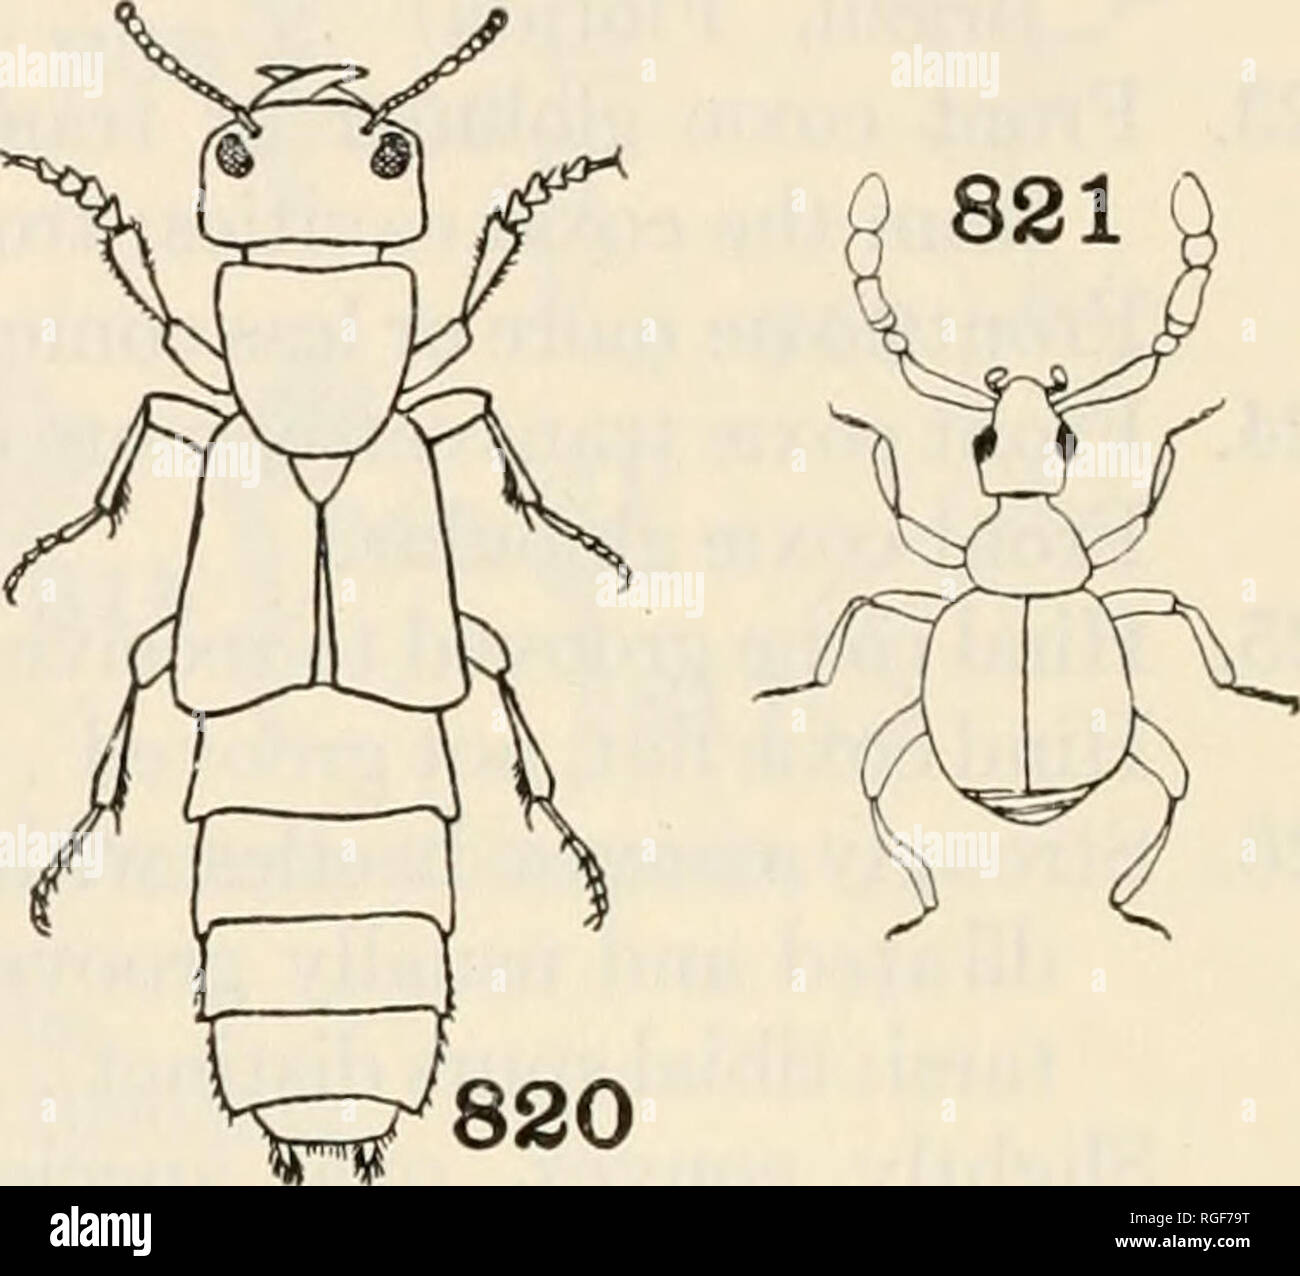 . Bulletin of the Museum of Comparative Zoology at Harvard College. Zoology. Figs. 818-821. Coleoptera 818. Brachinus. Carabidae. 819. Glischrochilus (Felt) Nitidulidae. 820. Staphylinus. Staphylinidse. 821. Goniastes (Westwood) Pselaphidse. 31. Posterior coxae at most moderately dilated internally. (Cyphon, cosmop.; Helodes, Scirtes, widespr.; (Figs. 794, 796, 825). (CYPHONID^) HELODID^ Posterior coxae very large. (Eucinetus, widespr.; Euscaphurus, nearc.) EUCINETID^l 32. Antennae geniculate, very strongly clavate or capitate; elytra shortened, leaving two tergites uncovered; all tibiae usual Stock Photo